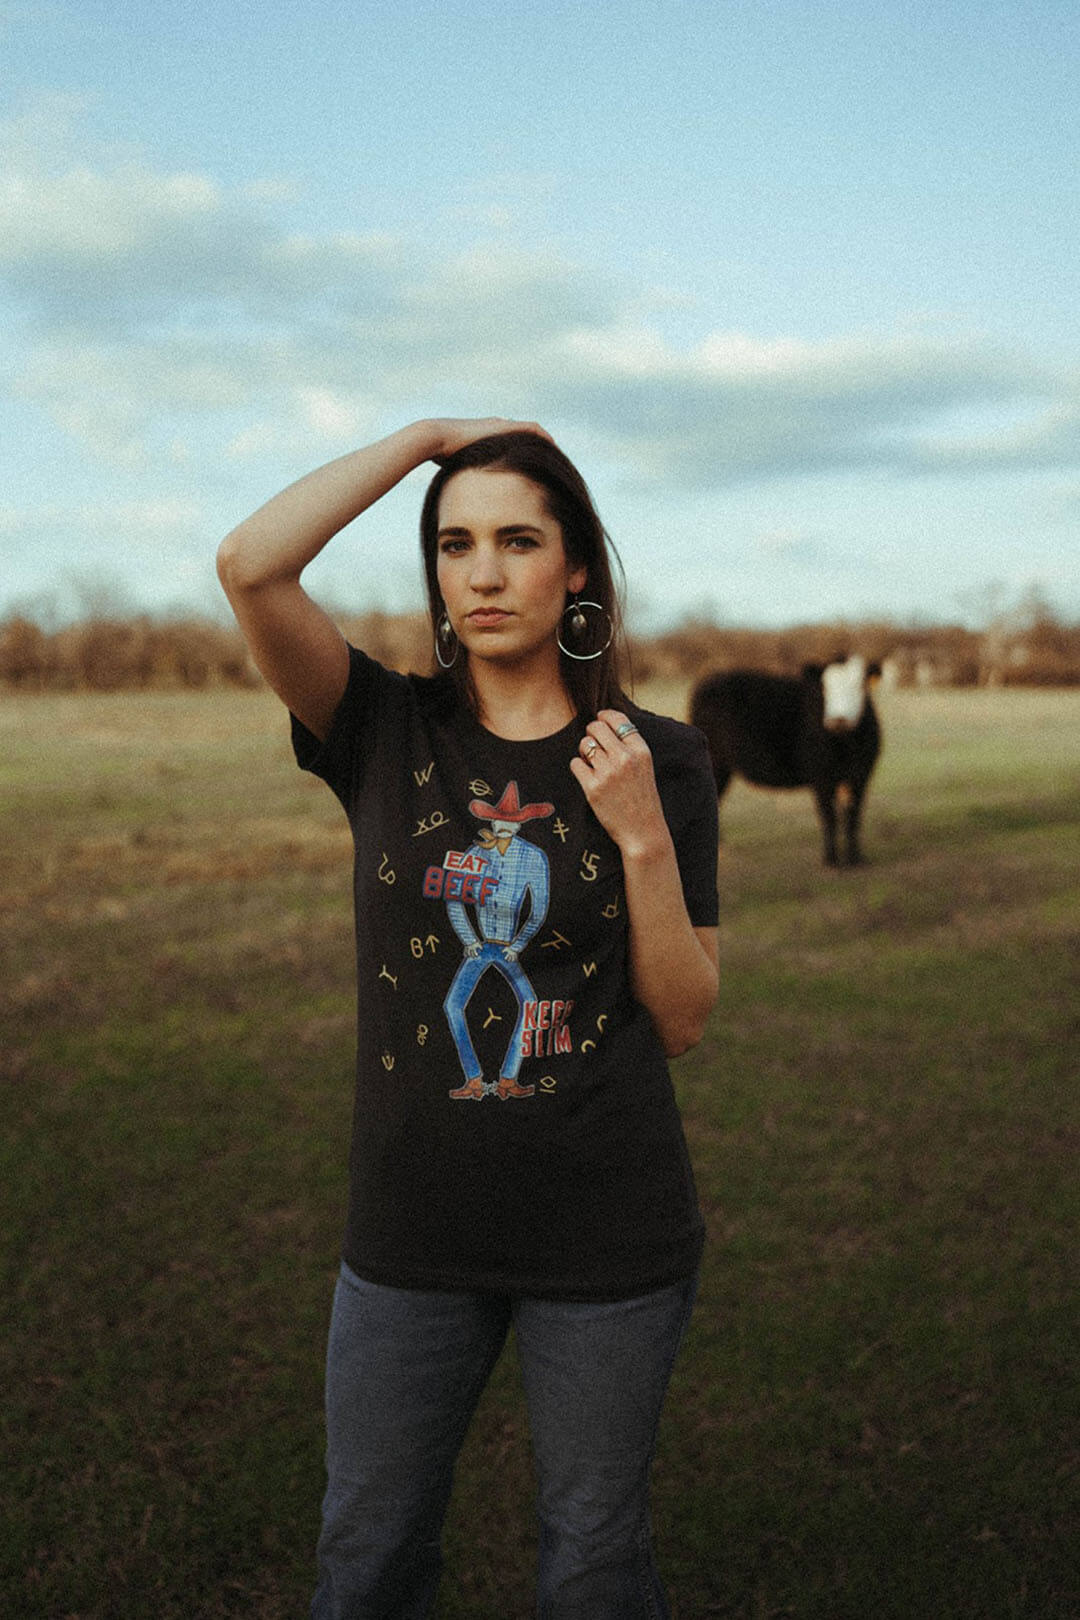 Woman modeling the "Eat Beef, Keep Slim" graphic shirt by XOXO art & company.  